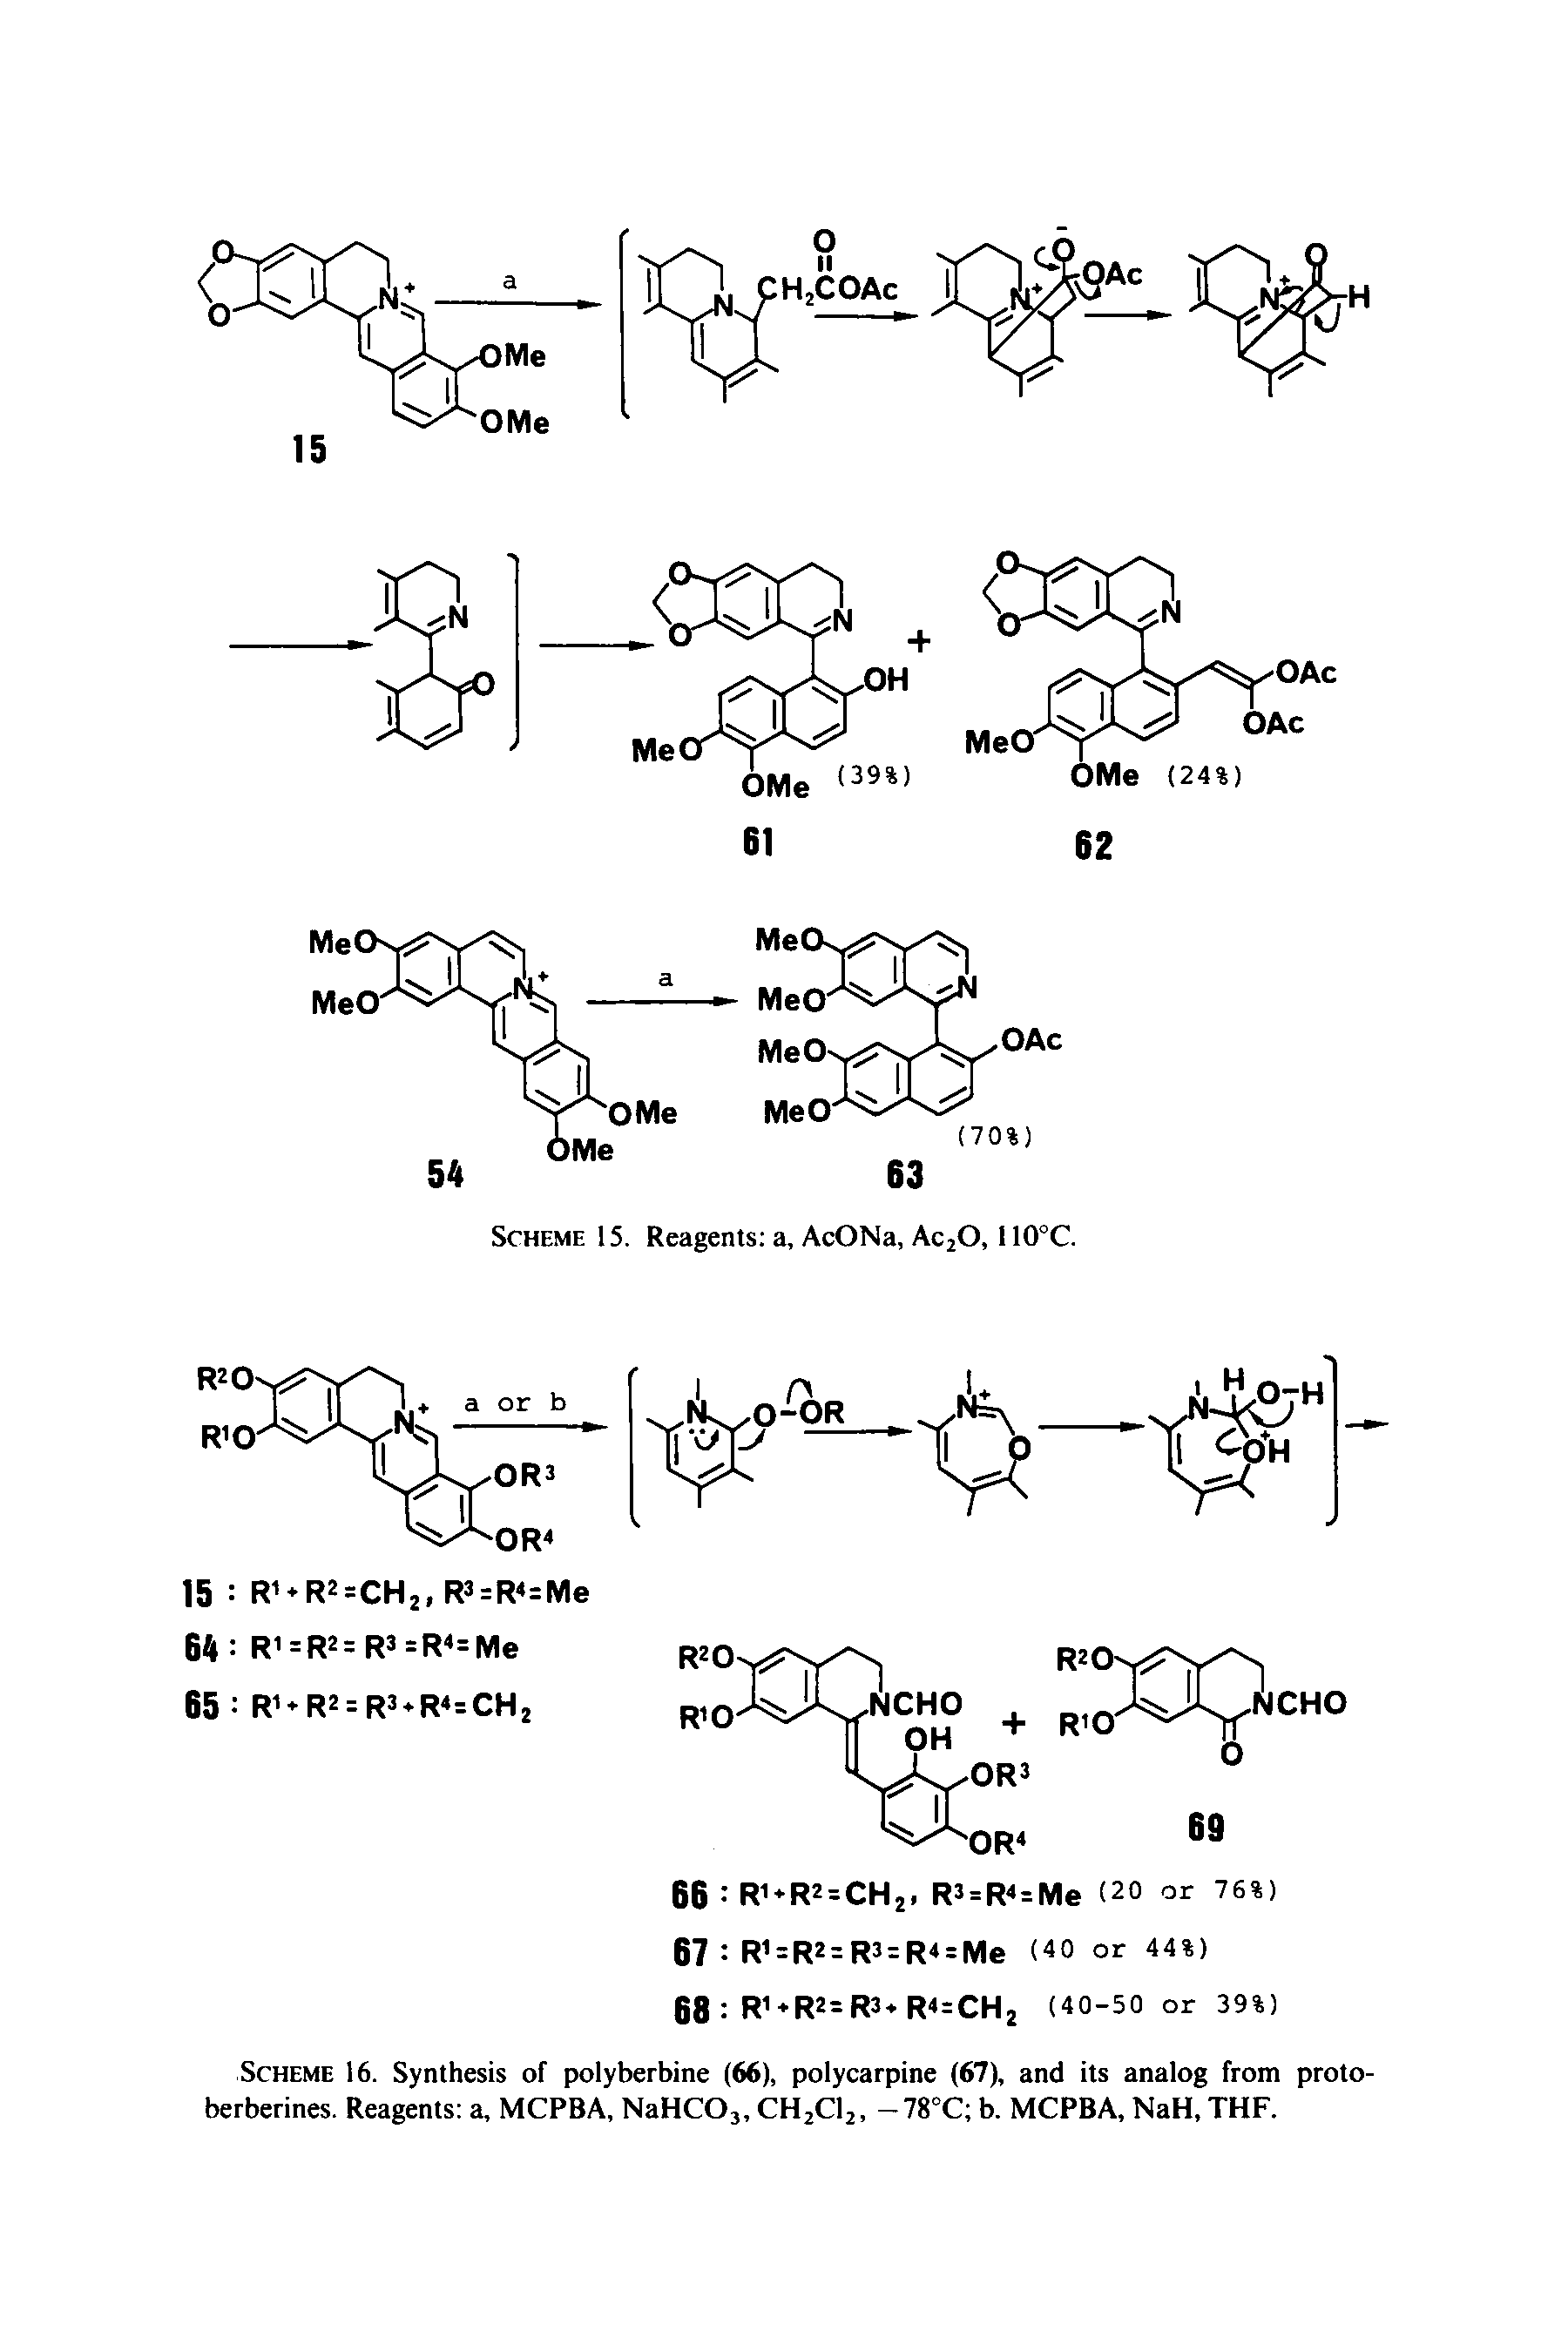 Scheme 16. Synthesis of polyberbine (66), polycarpine (67), and its analog from proto-berberines. Reagents a, MCPBA, NaHCQ3, CH2C12, -78°C b. MCPBA, NaH, THF.